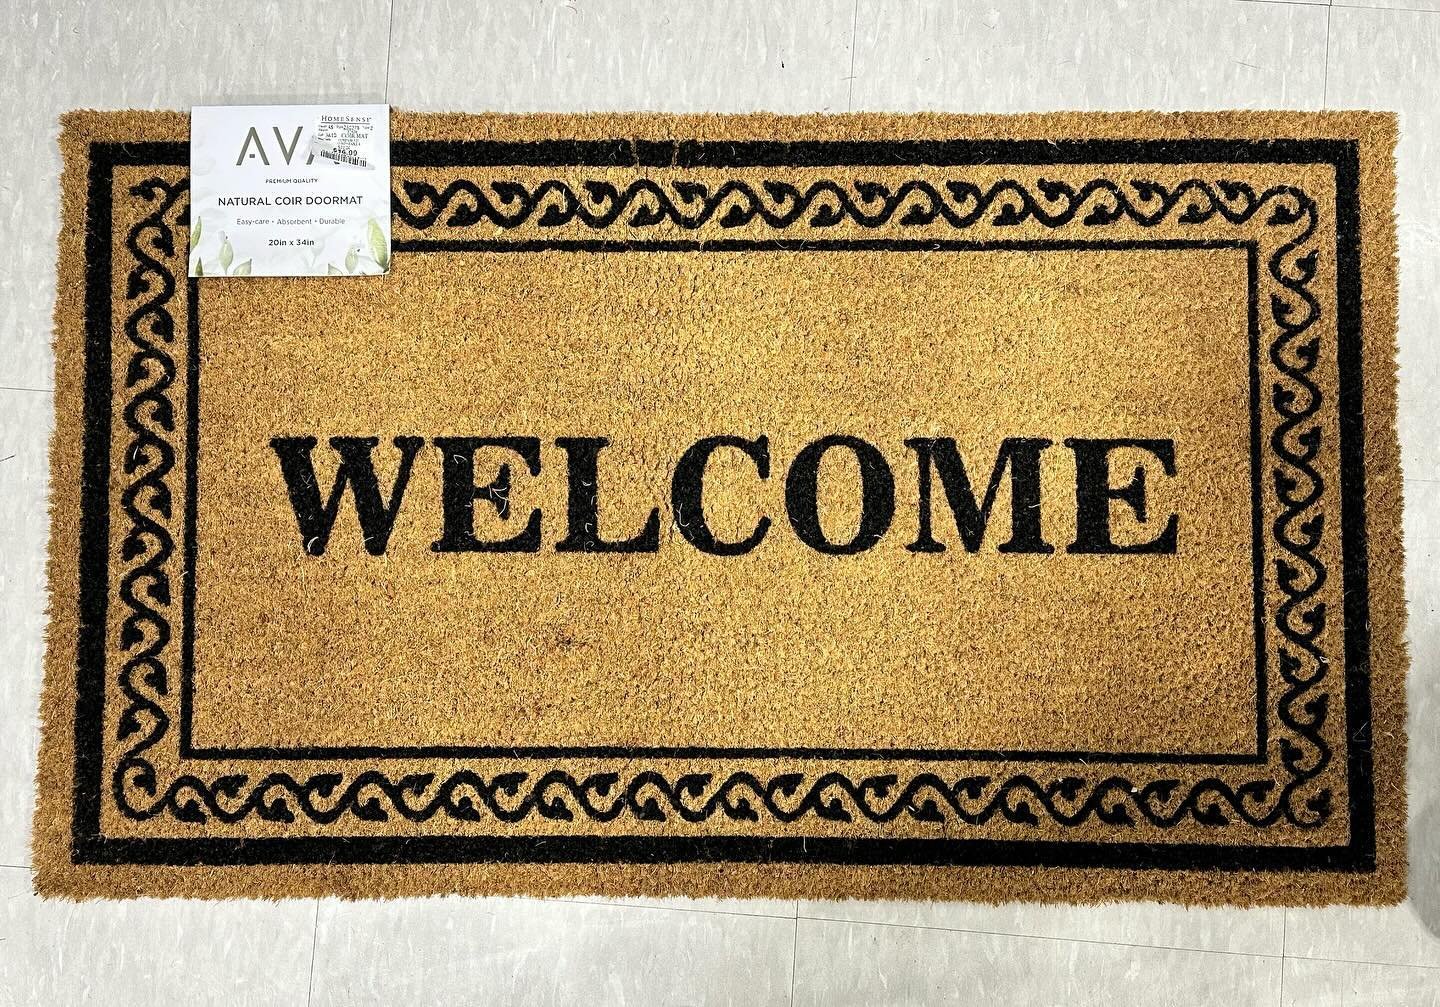 Welcoming buyers into your home can be as simple as a brand new doormat

WELCOME! We love to show you our house!

Simple changes make a big impact. And best thing it does not have to be expensive! 

@jysk.ca is a great location for new doormats. You 